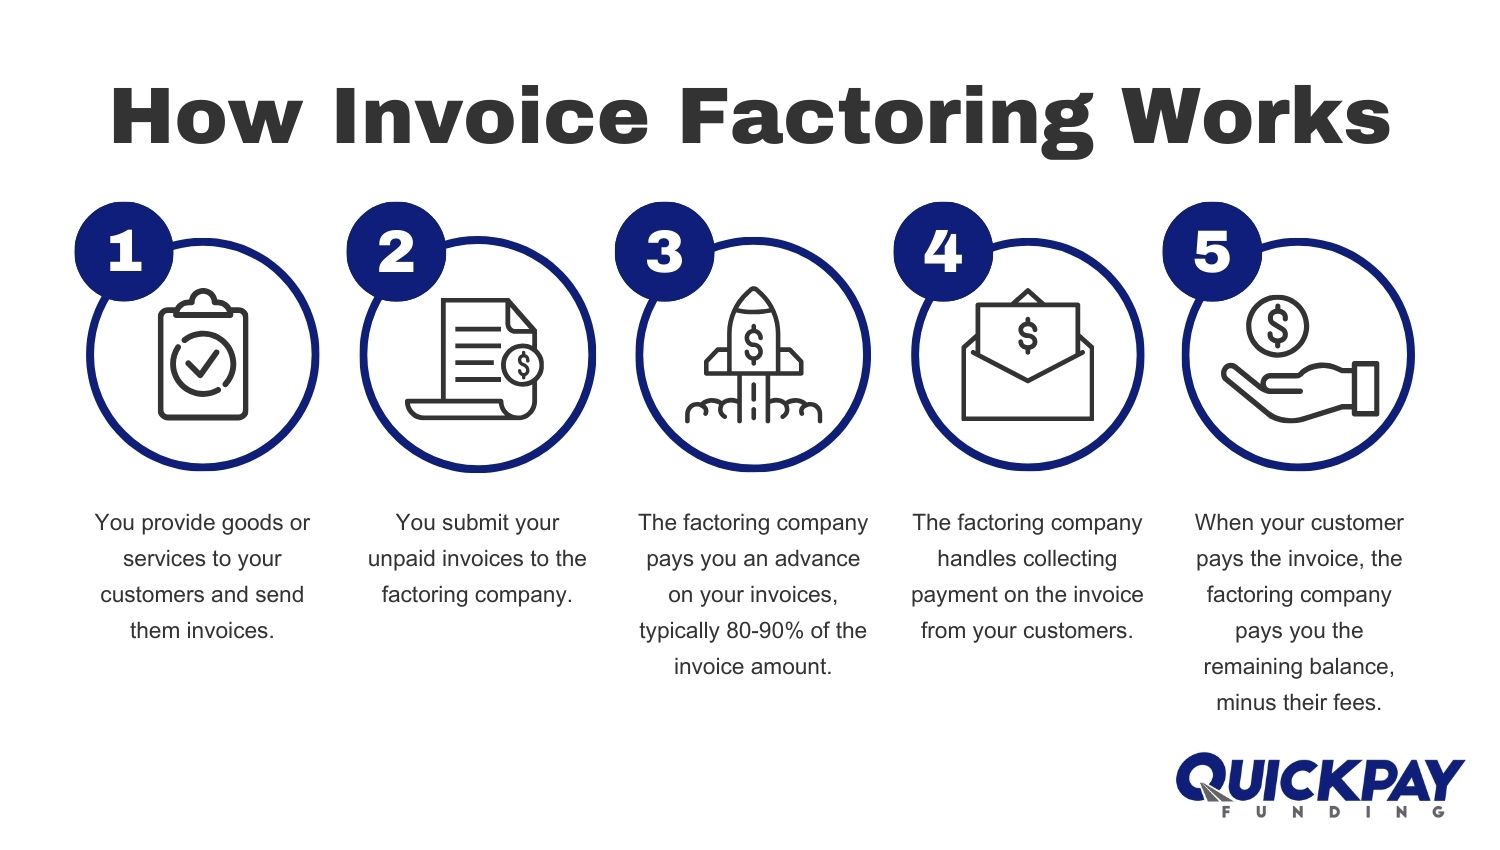 how invoice factoring works infographic